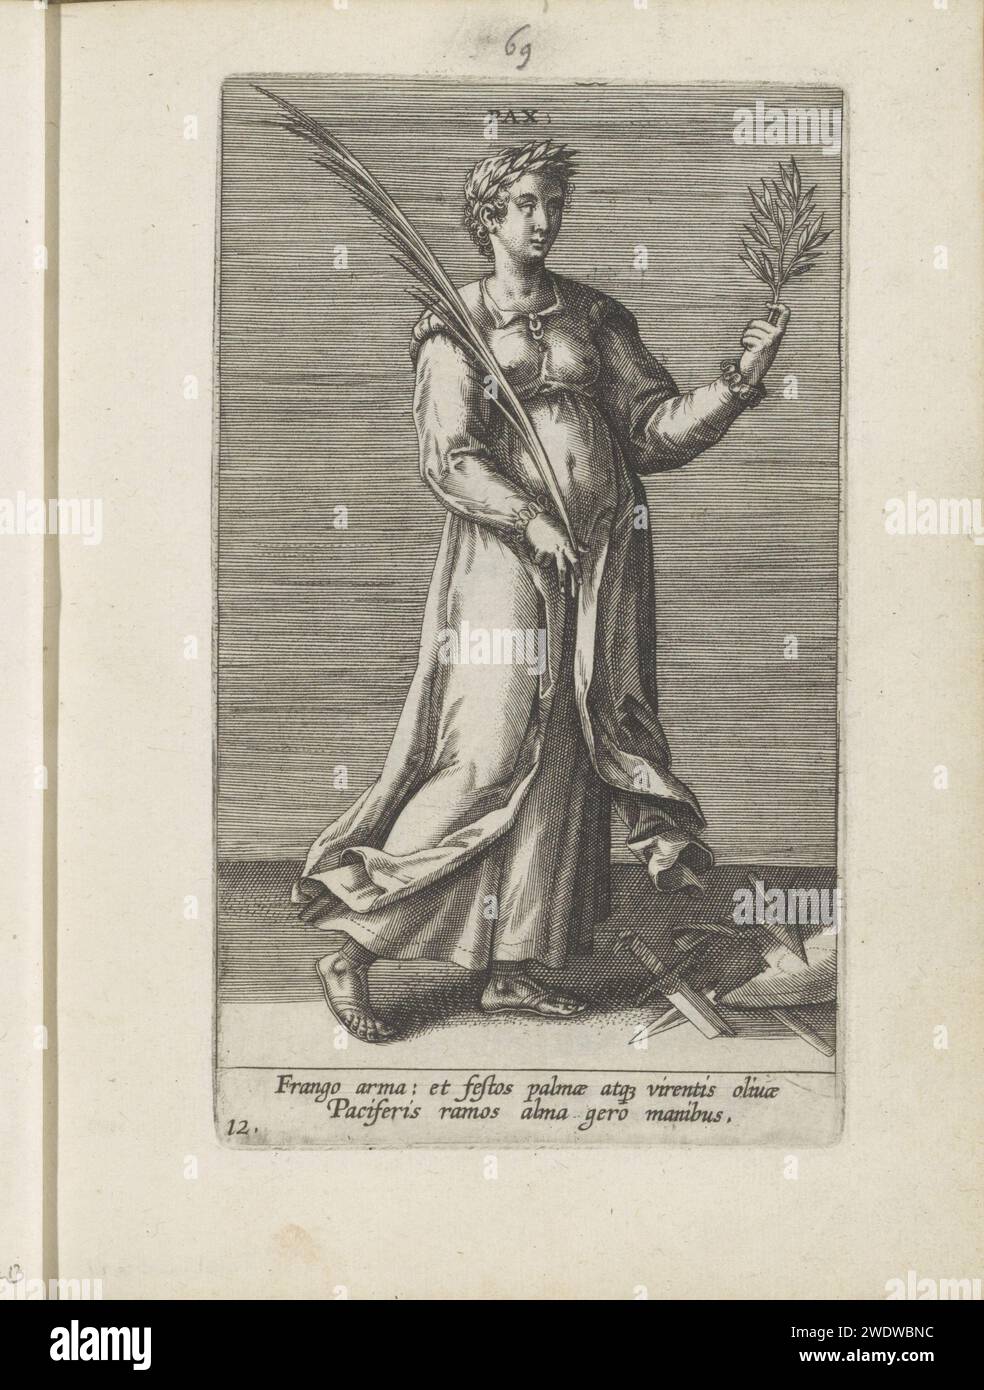 Vrede, Philips Galle, c. 1585 - C. 1590 print Standing woman with a laurel wreath on her head. In her left hand she holds an olive branch, a palm branch in her right hand. The olive branch is a symbol for peace, the palm branch of victory. Under the show two lines of text in Latin. The print is part of an album. print maker: AntwerpSouthern Netherlands paper engraving Pax as Roman personification Stock Photo